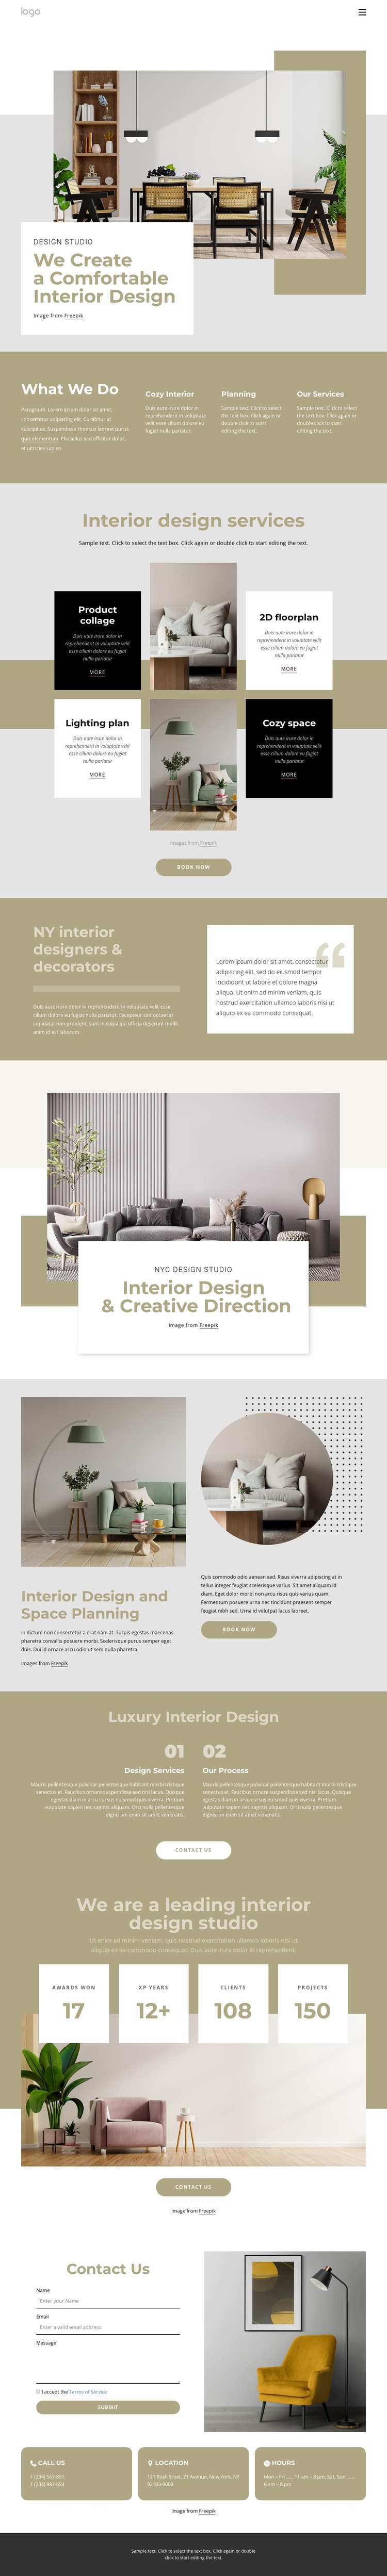 We create a comfortable interiors HTML Template